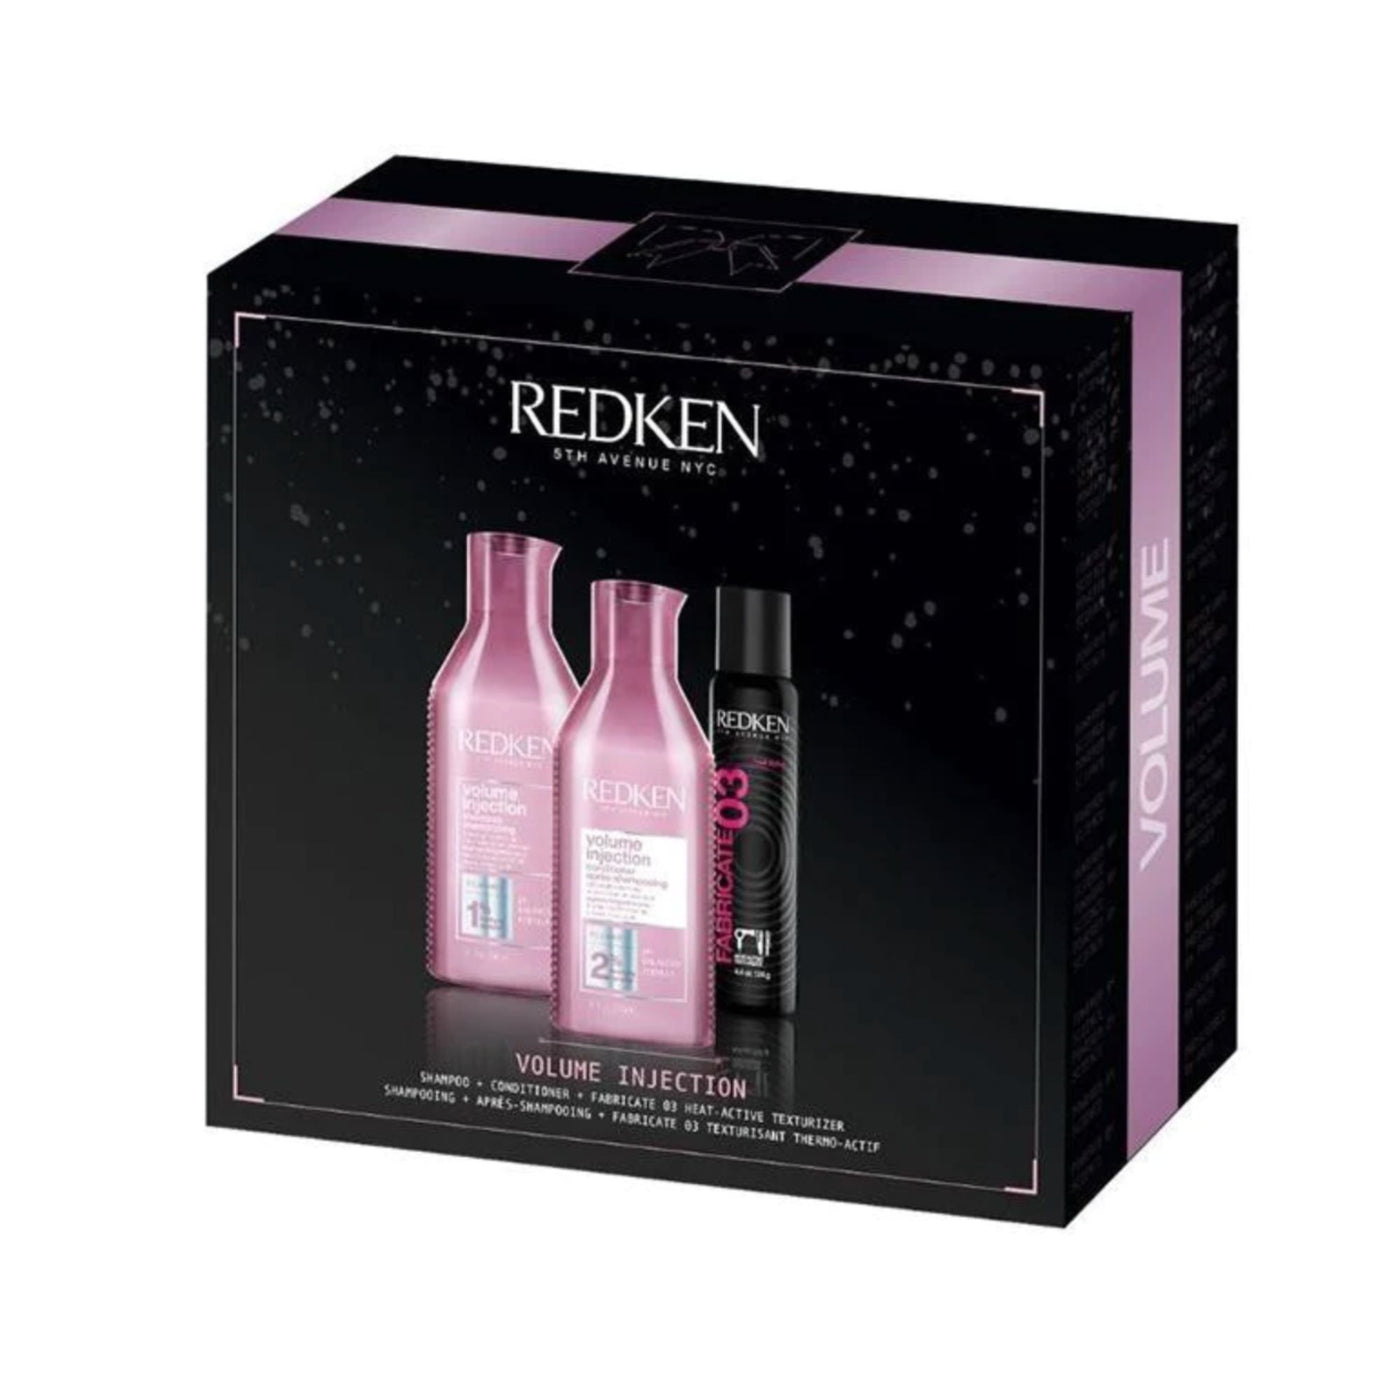 Redken Volume Injection Trio Holiday Pack